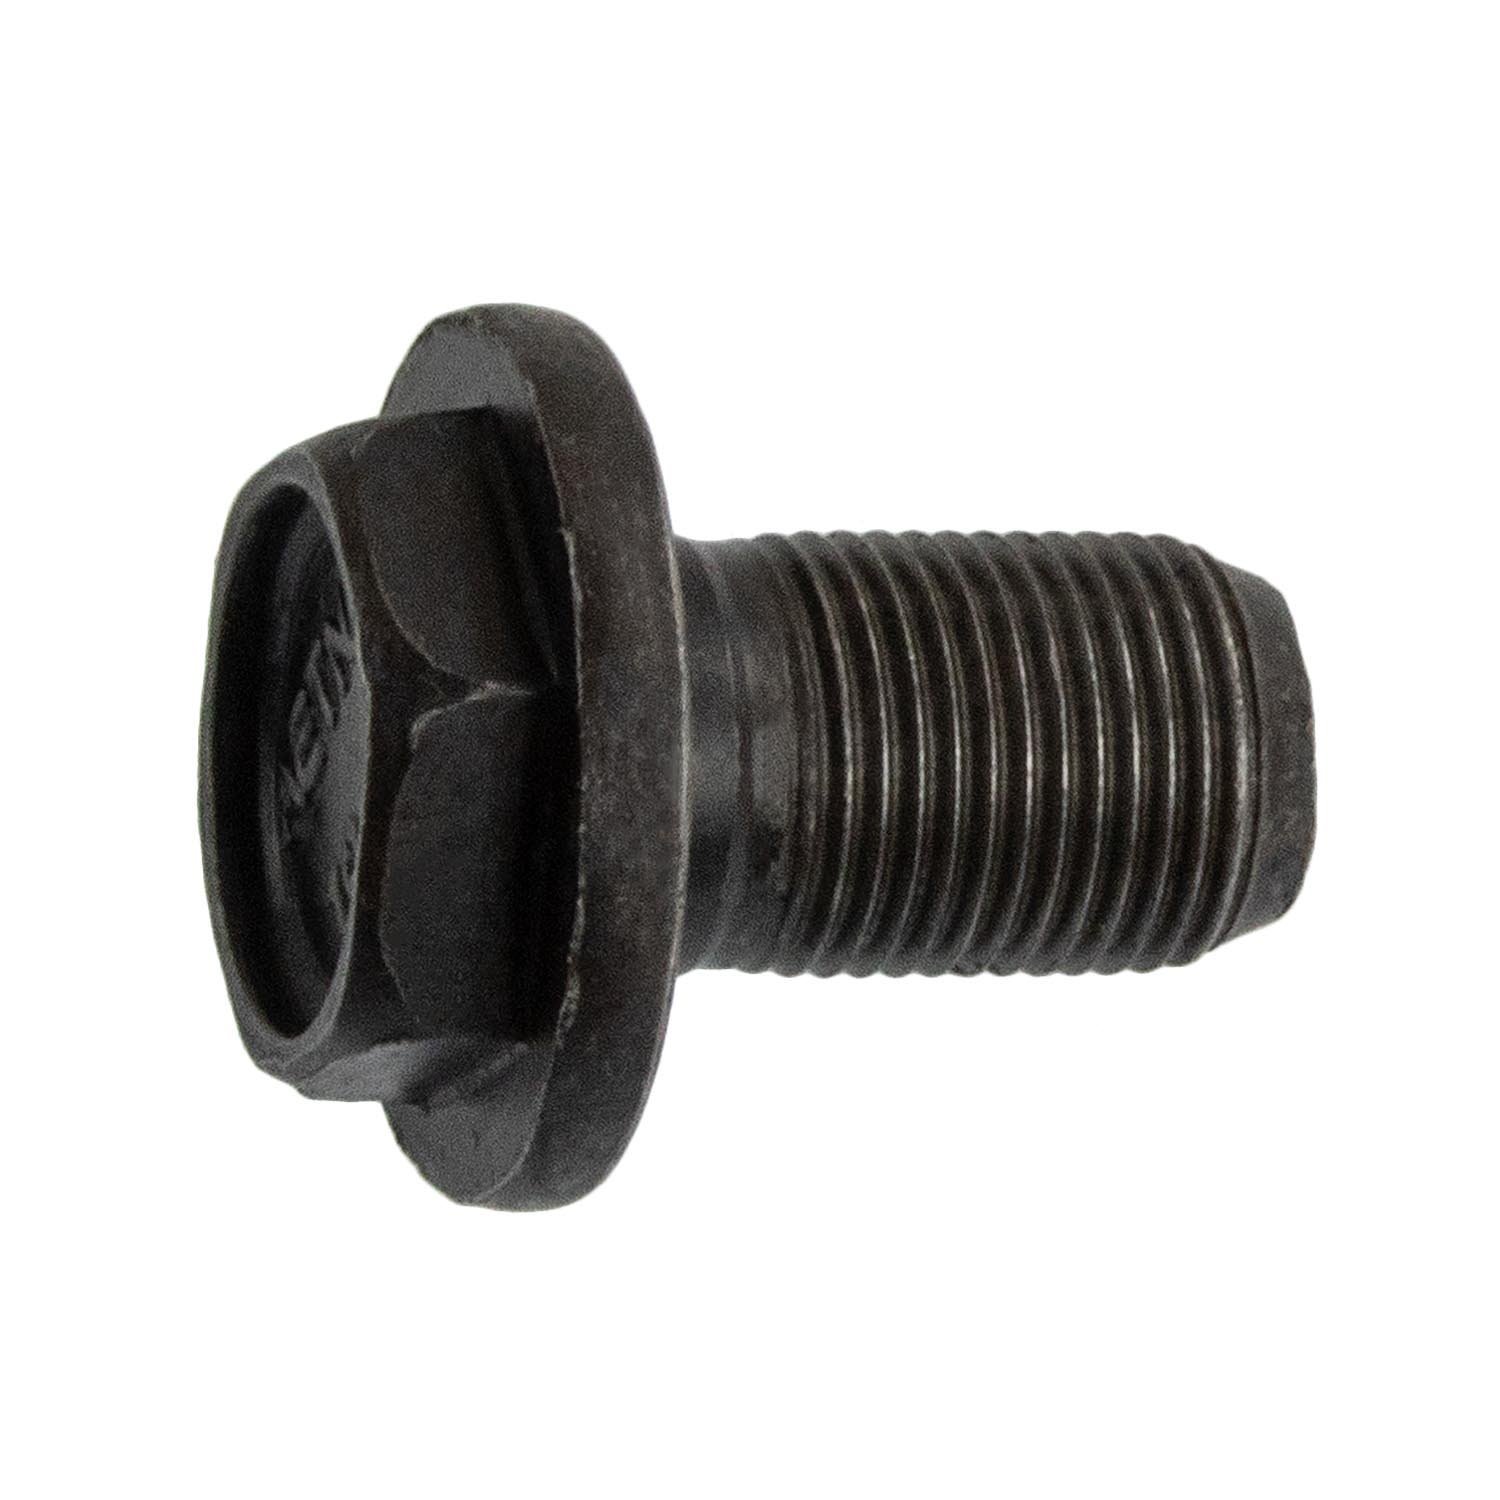 Ring Gear Bolt for 2005-2015 Toyota Tacoma w/8 in. IFS or 8.4 in. Differentials